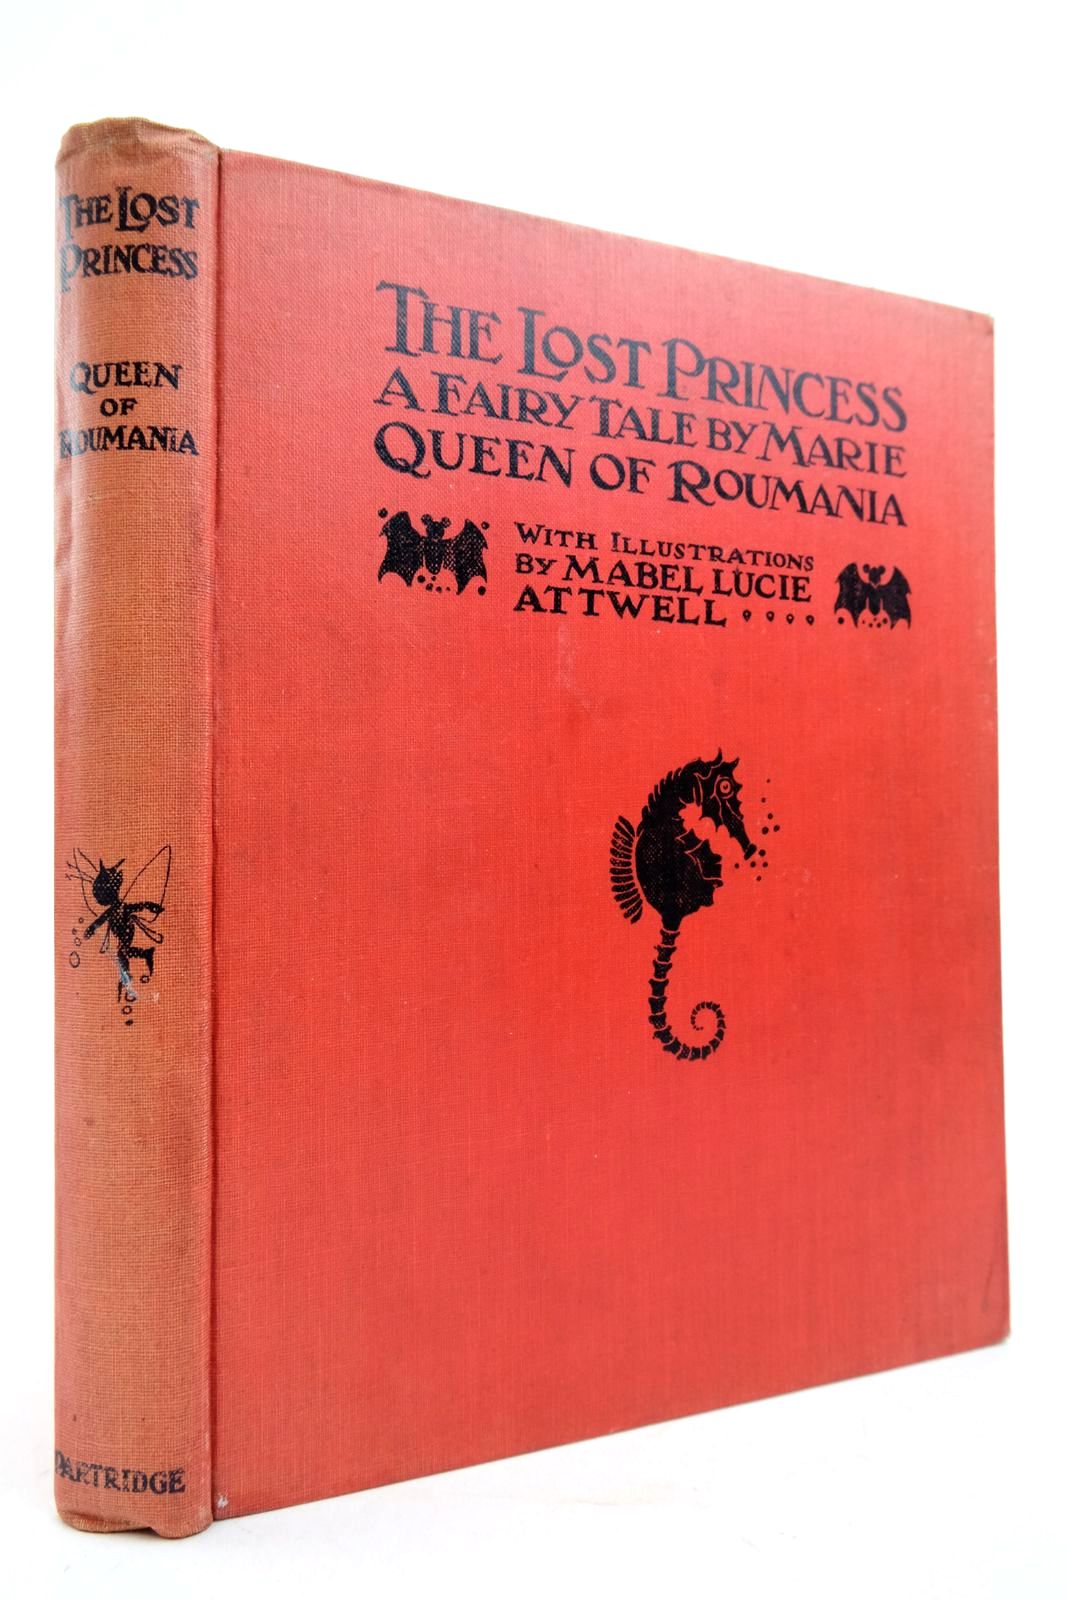 Photo of THE LOST PRINCESS written by Roumania, Marie Queen Of illustrated by Attwell, Mabel Lucie published by S.W. Partridge (STOCK CODE: 2140862)  for sale by Stella & Rose's Books